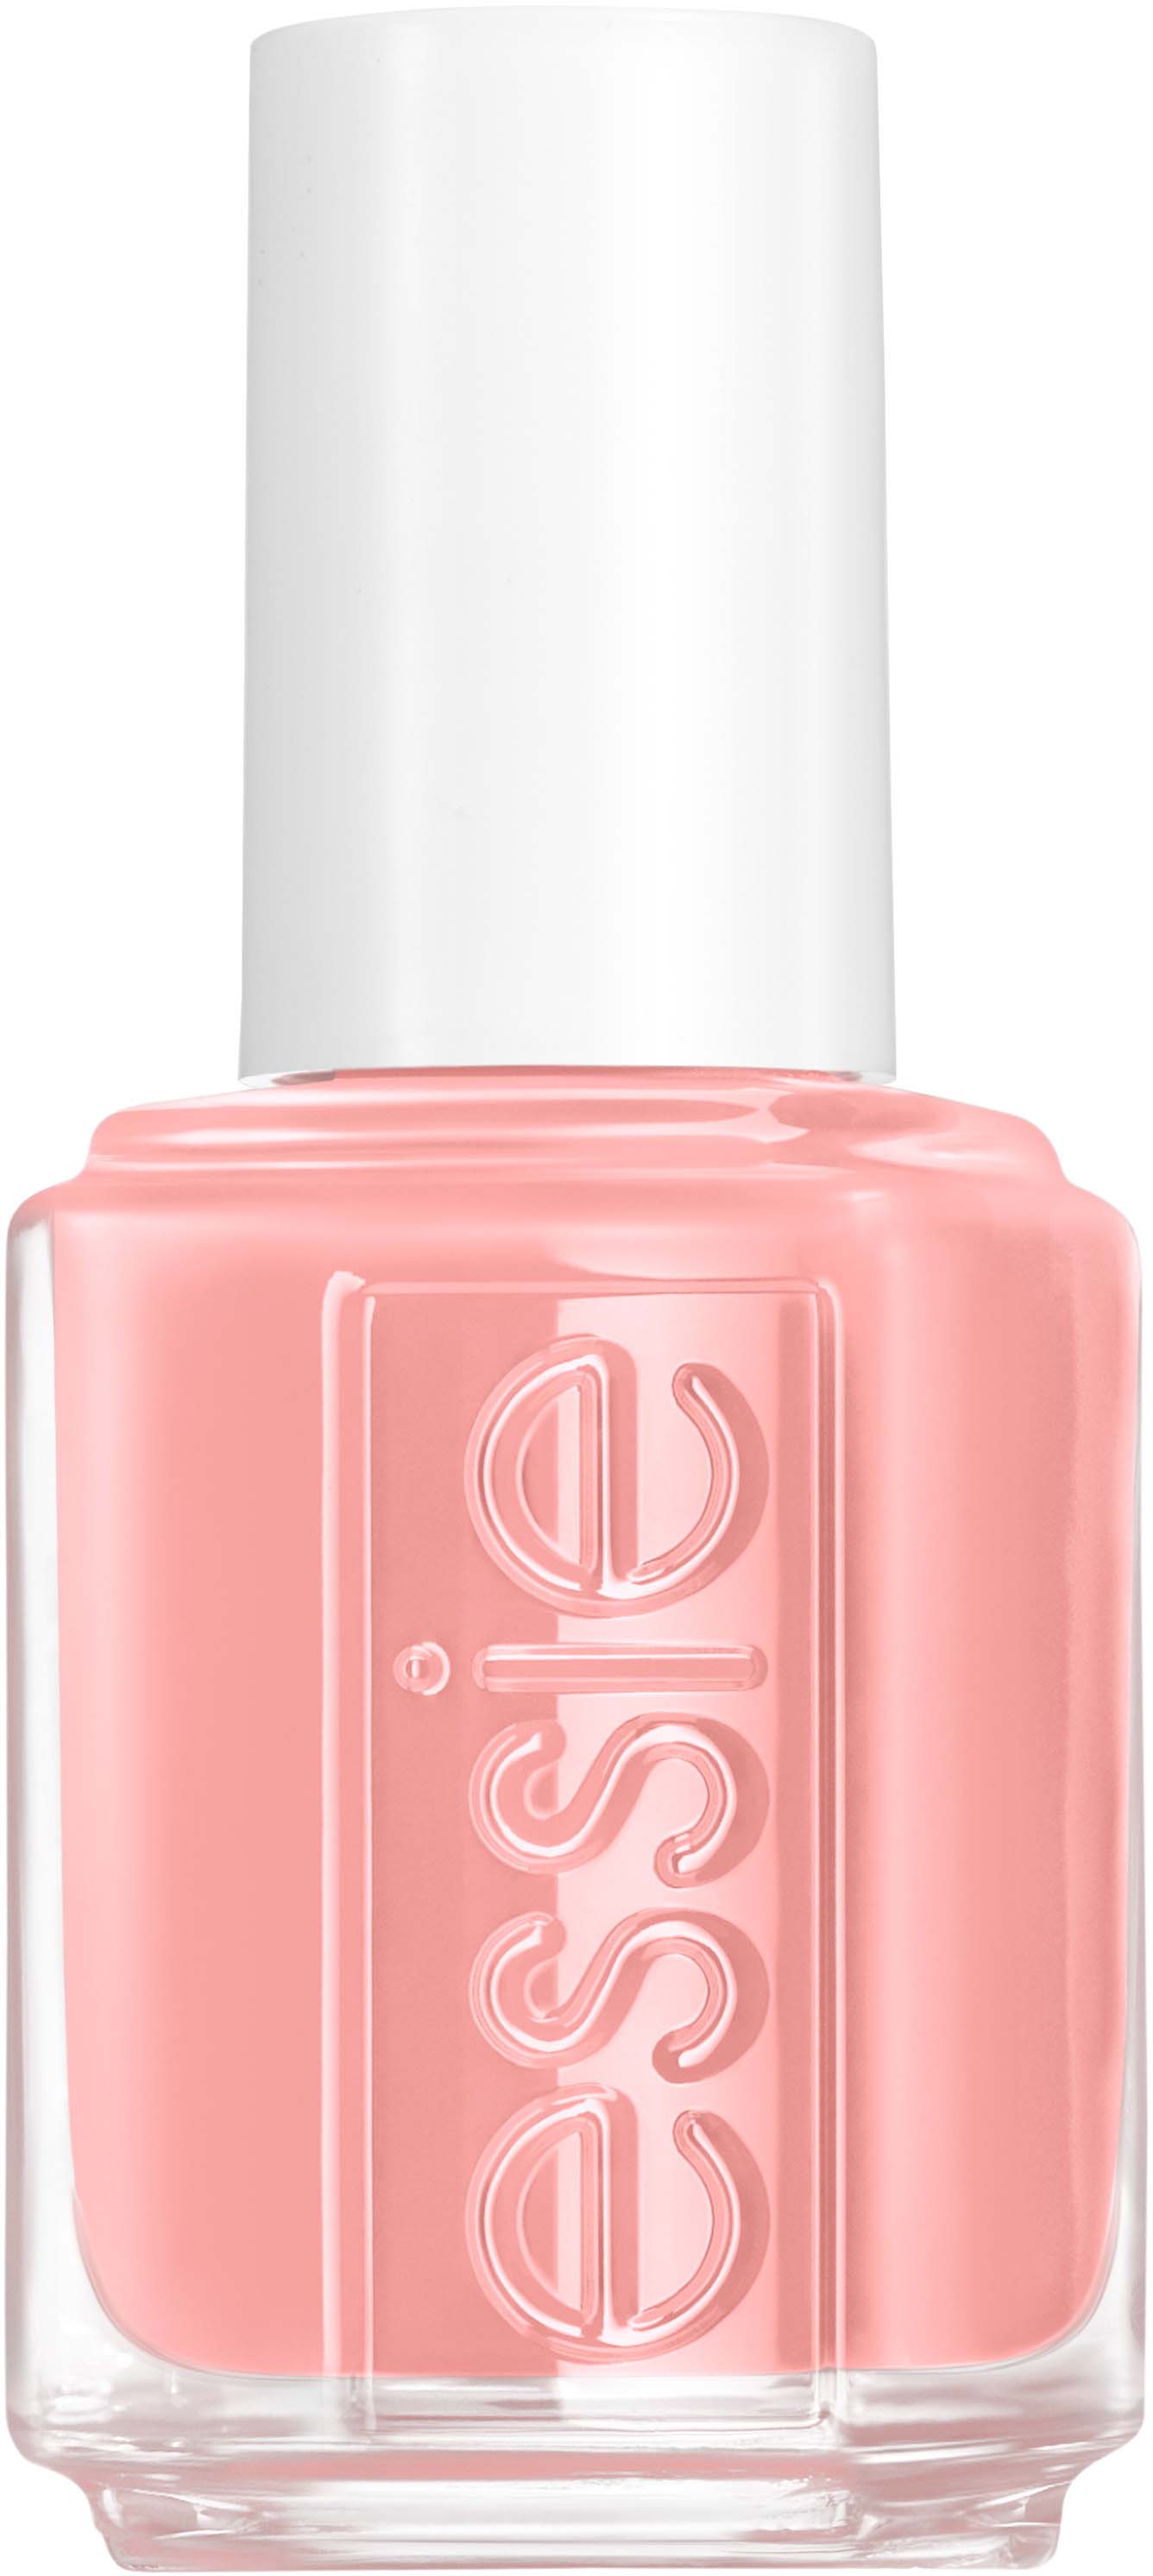 Essie not red-y for 748 bed Nail collection Lacquer Talk-the-Talk Pillow